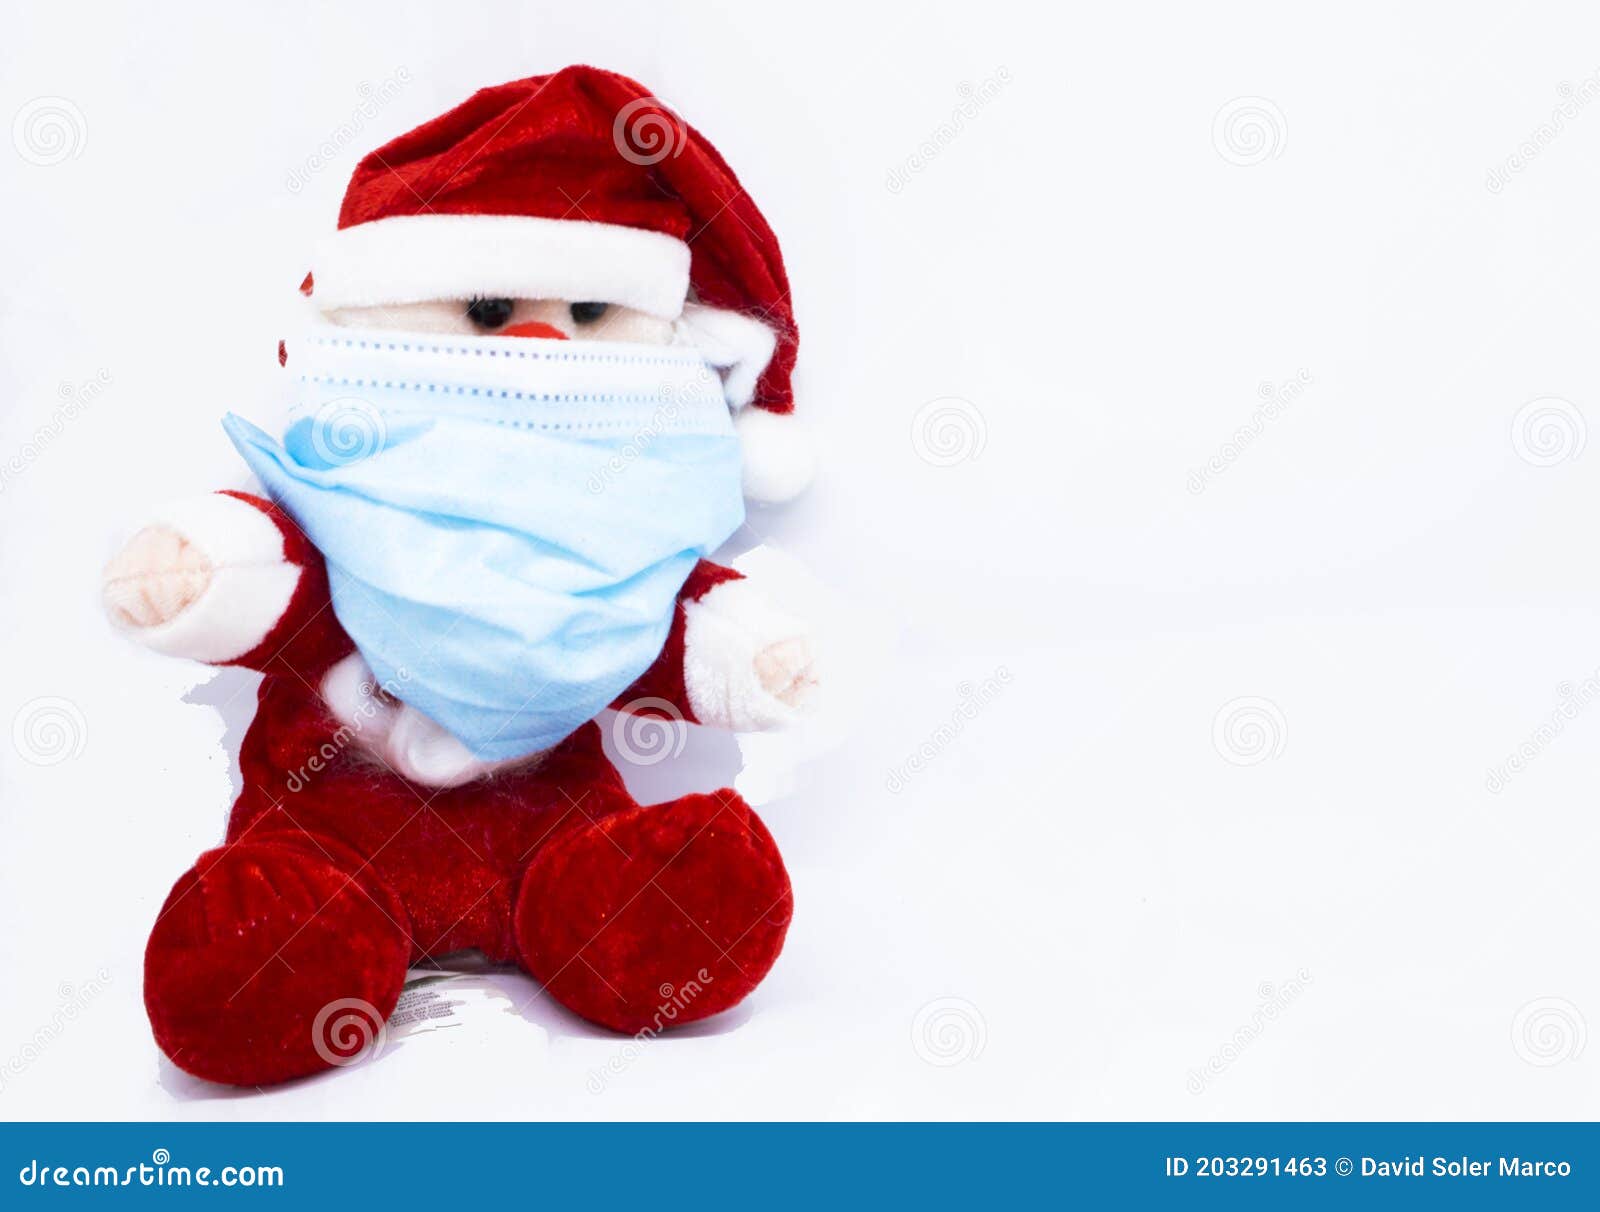 homemade cotton santa claus play with a covid-19 or coronavirus protection mask